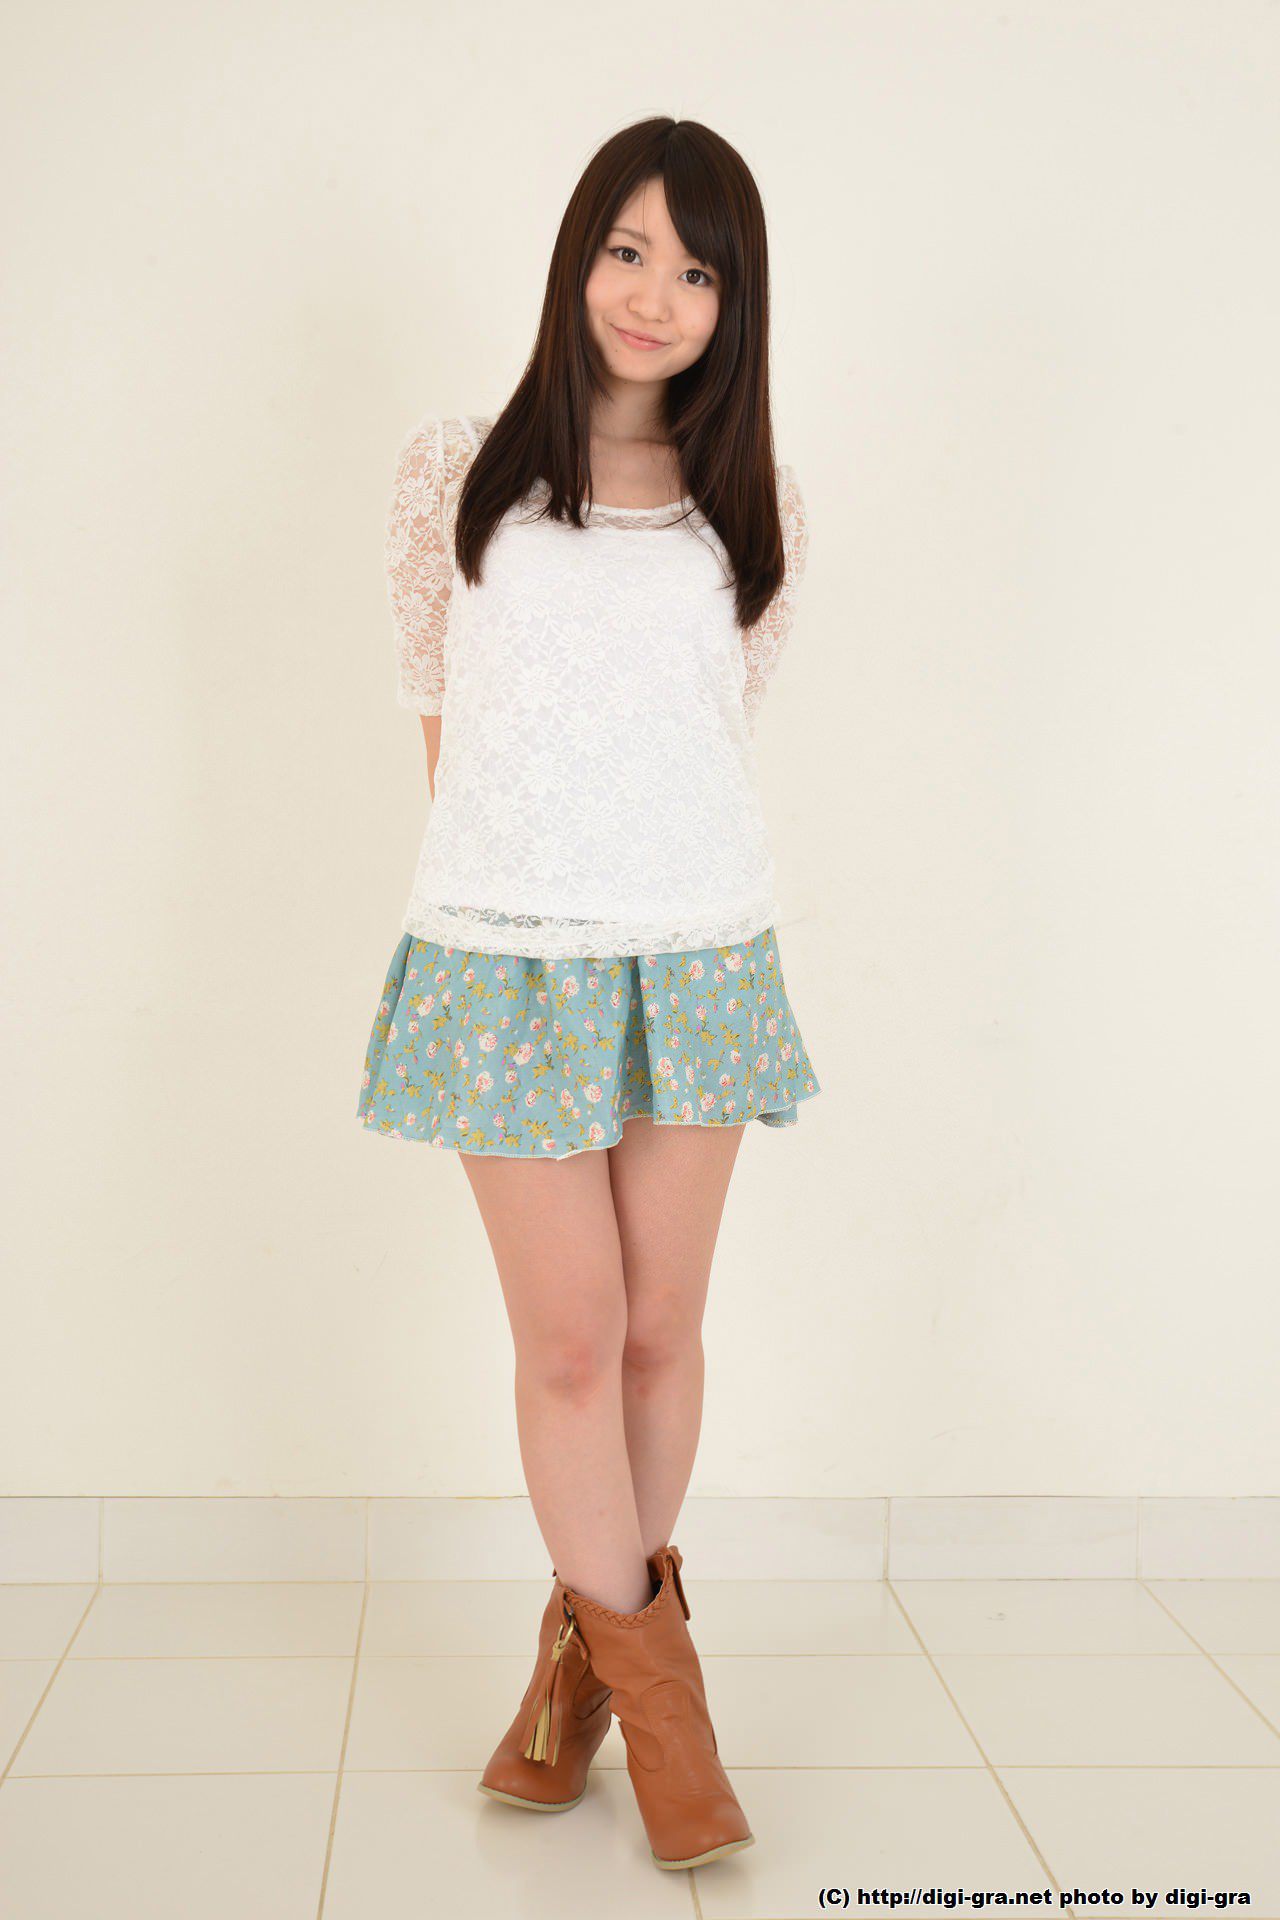 Japanese Long Hair White Blouse FLOWERED SKiRT Boots Looking At Viewer Standing Smiling Simple Backg 1280x1920